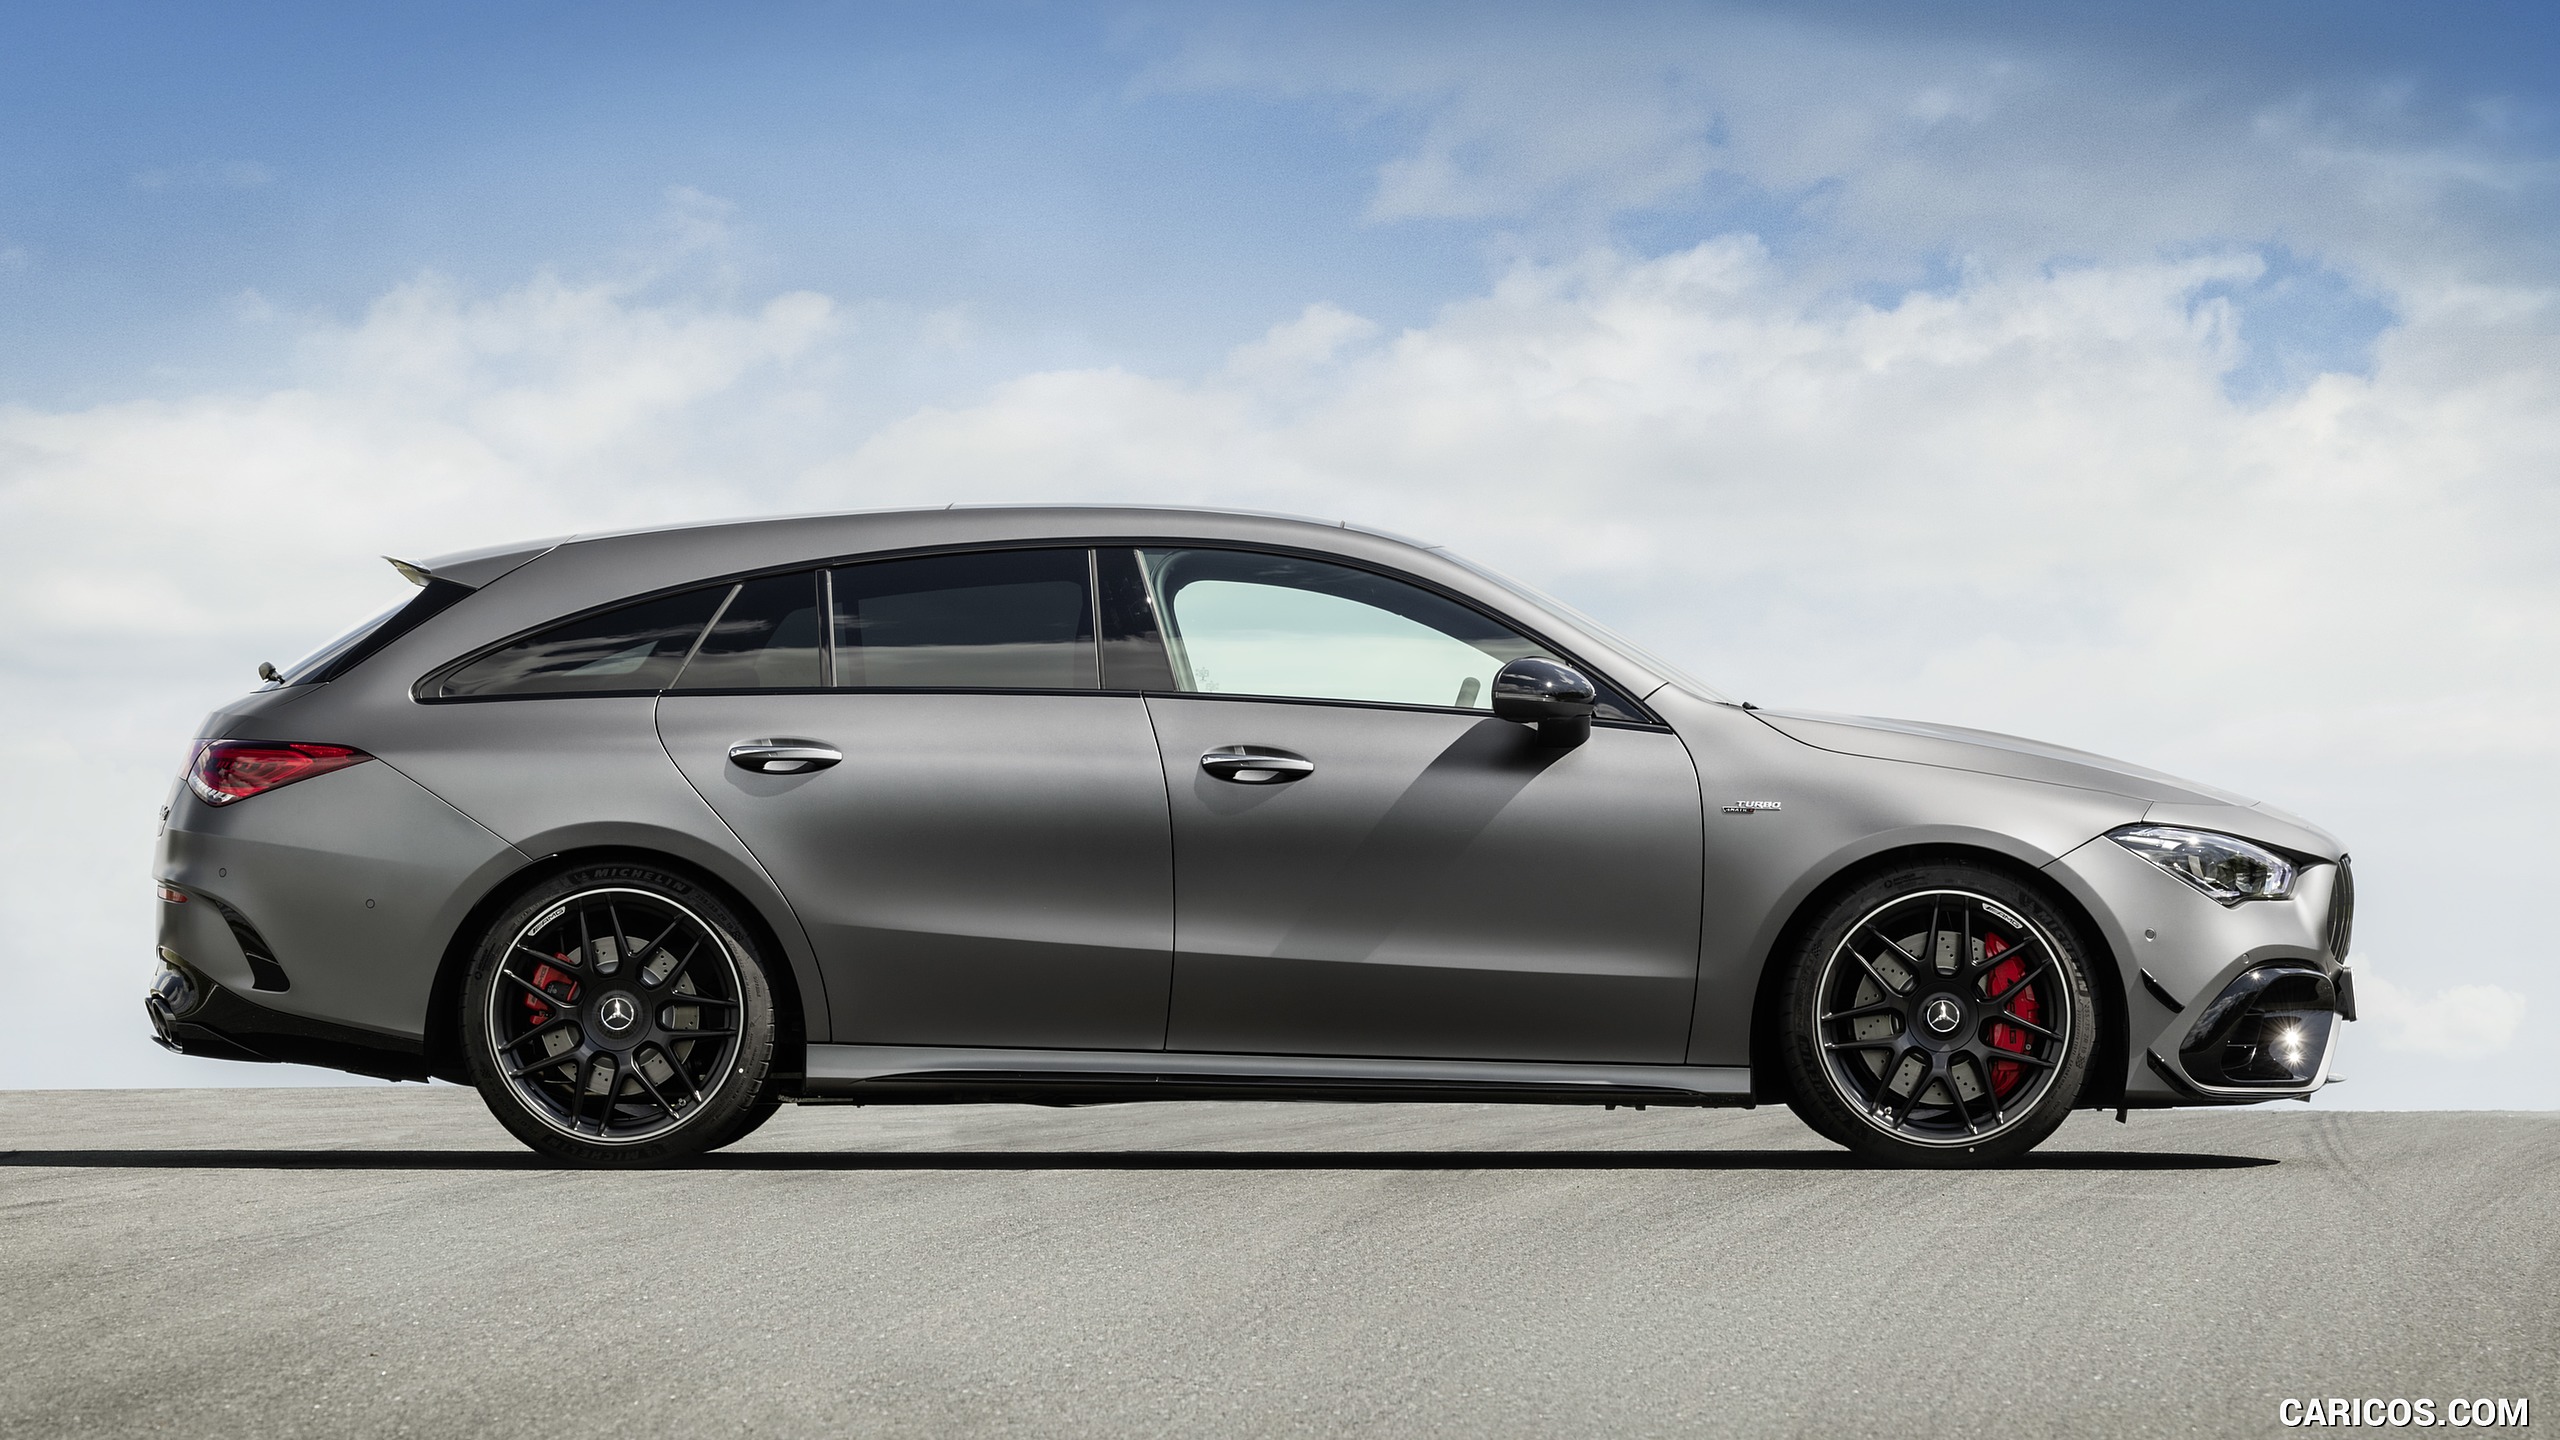 2020 Mercedes-AMG CLA 45 S 4MATIC+ Shooting Brake - Side, #17 of 35